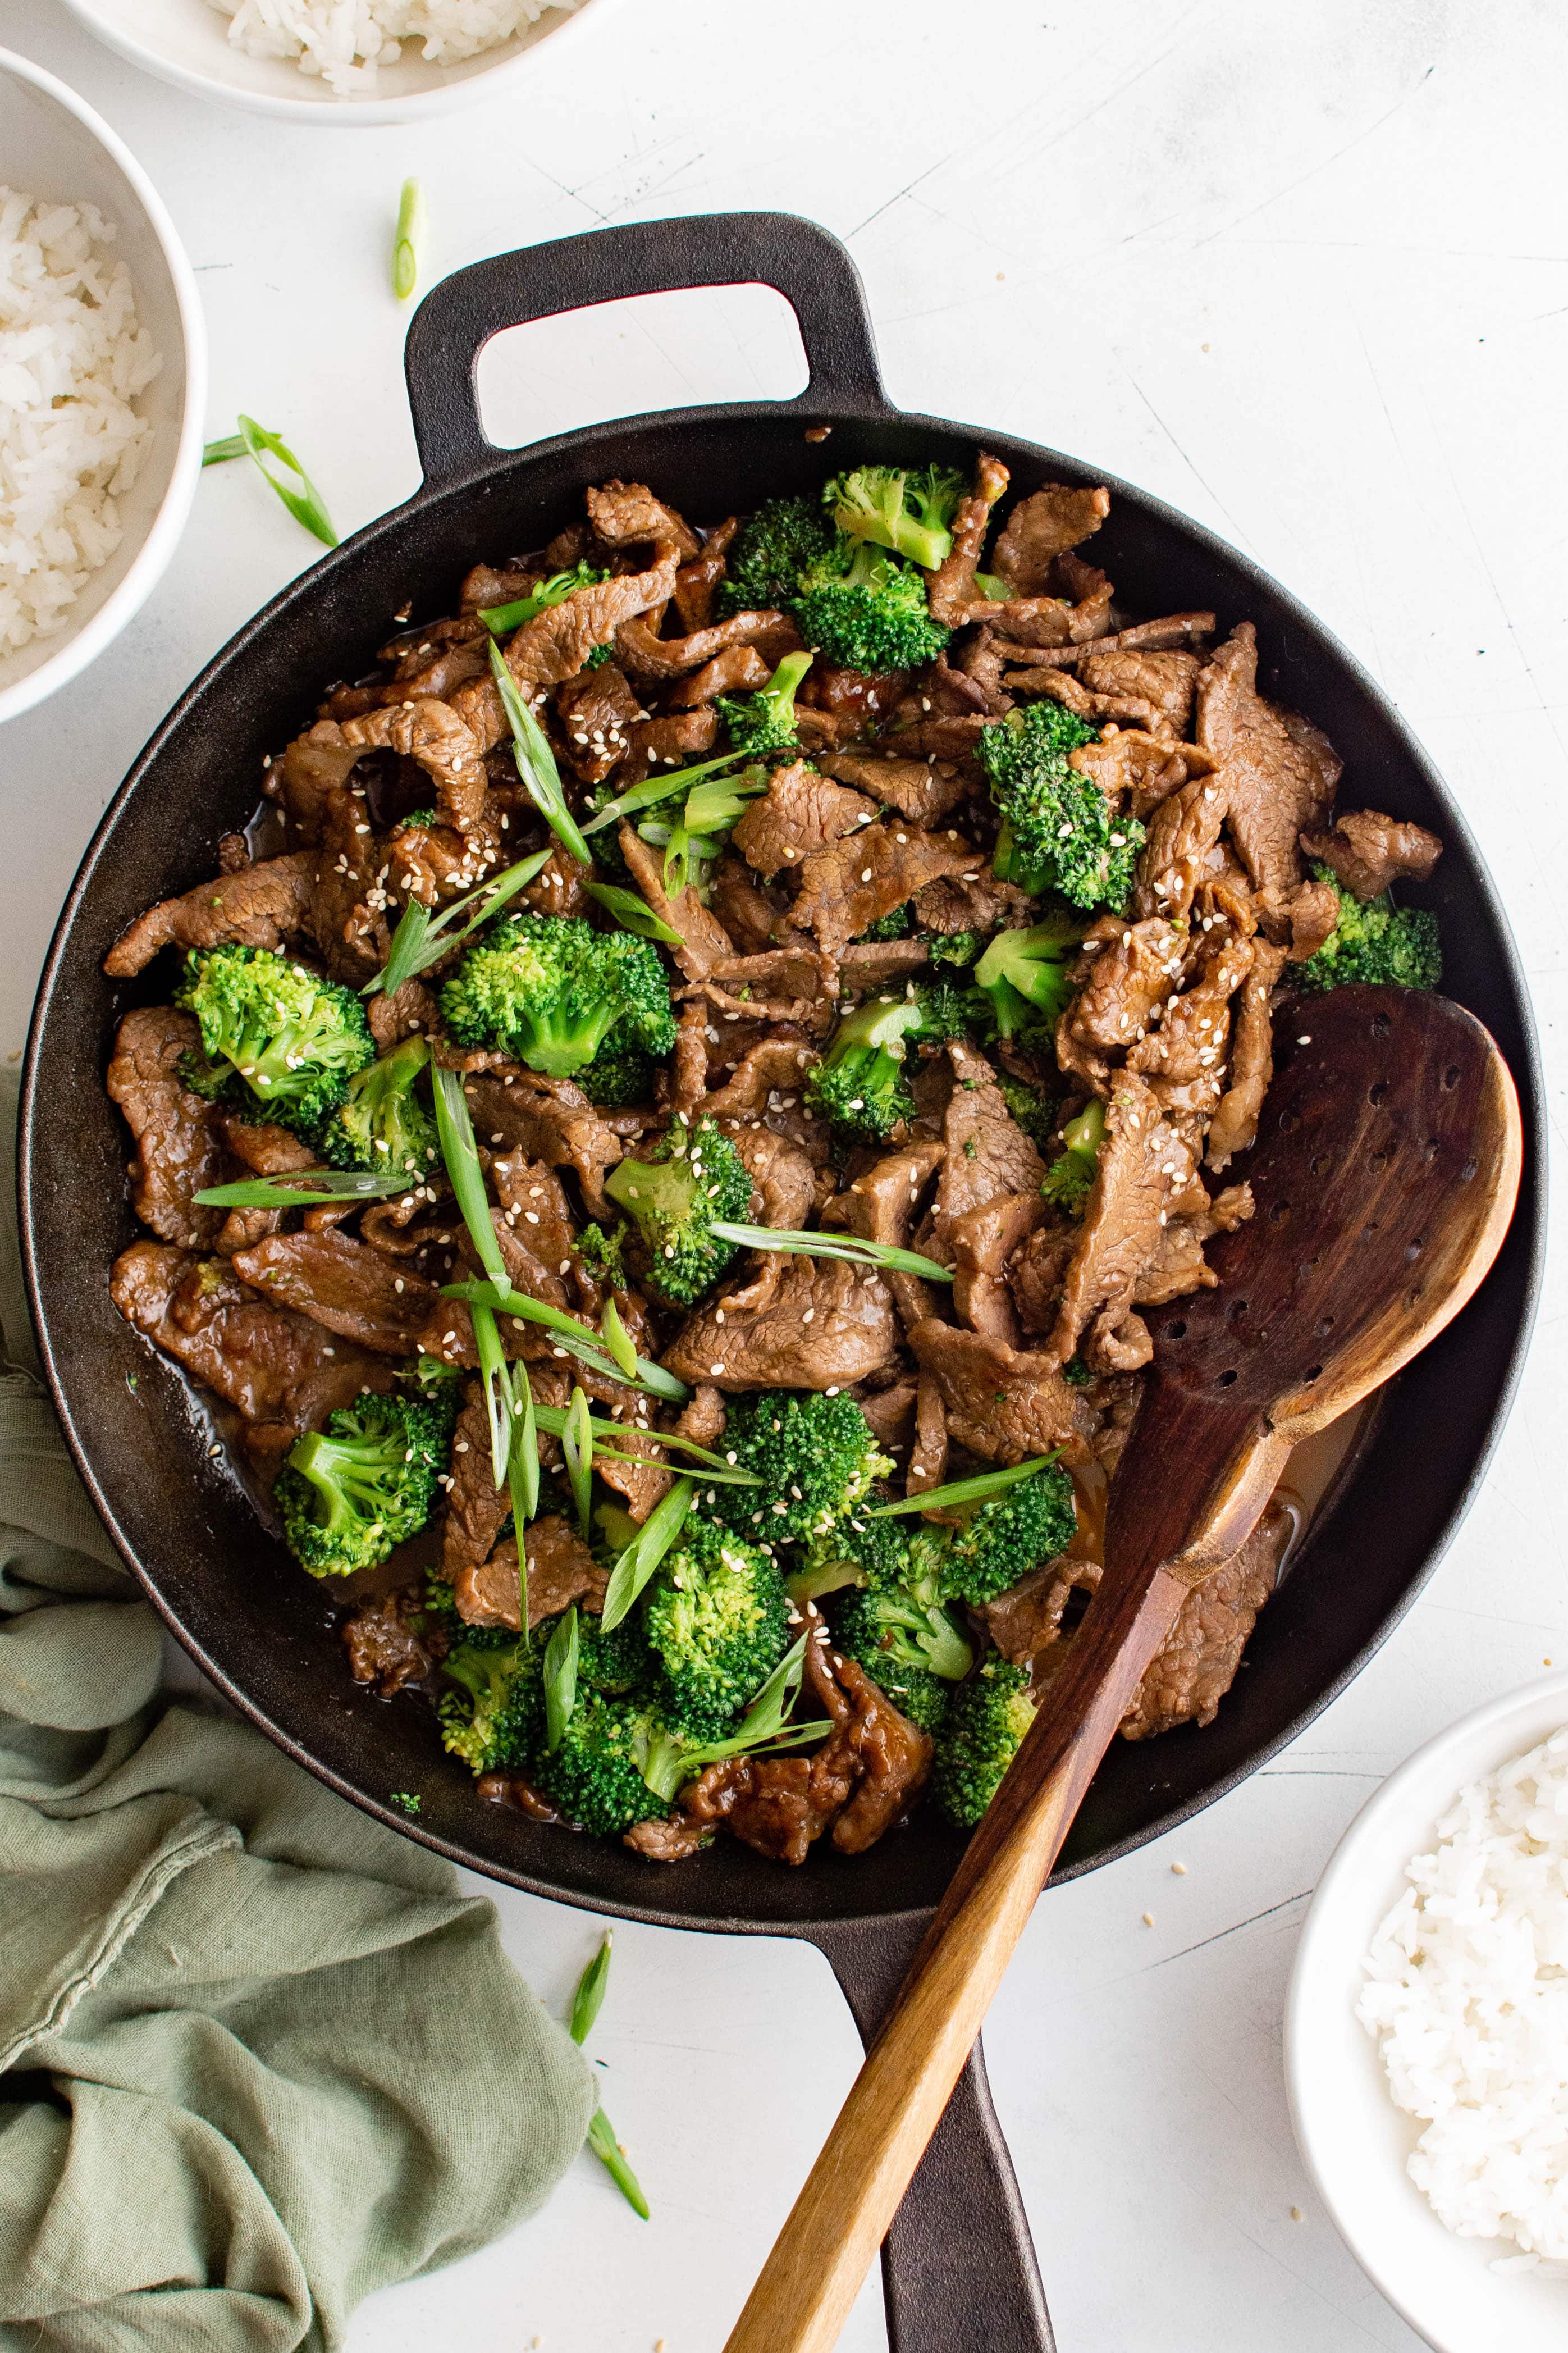 Cast iron skillet filled with cooked beef and broccoli recipe garnished with slice green onions.